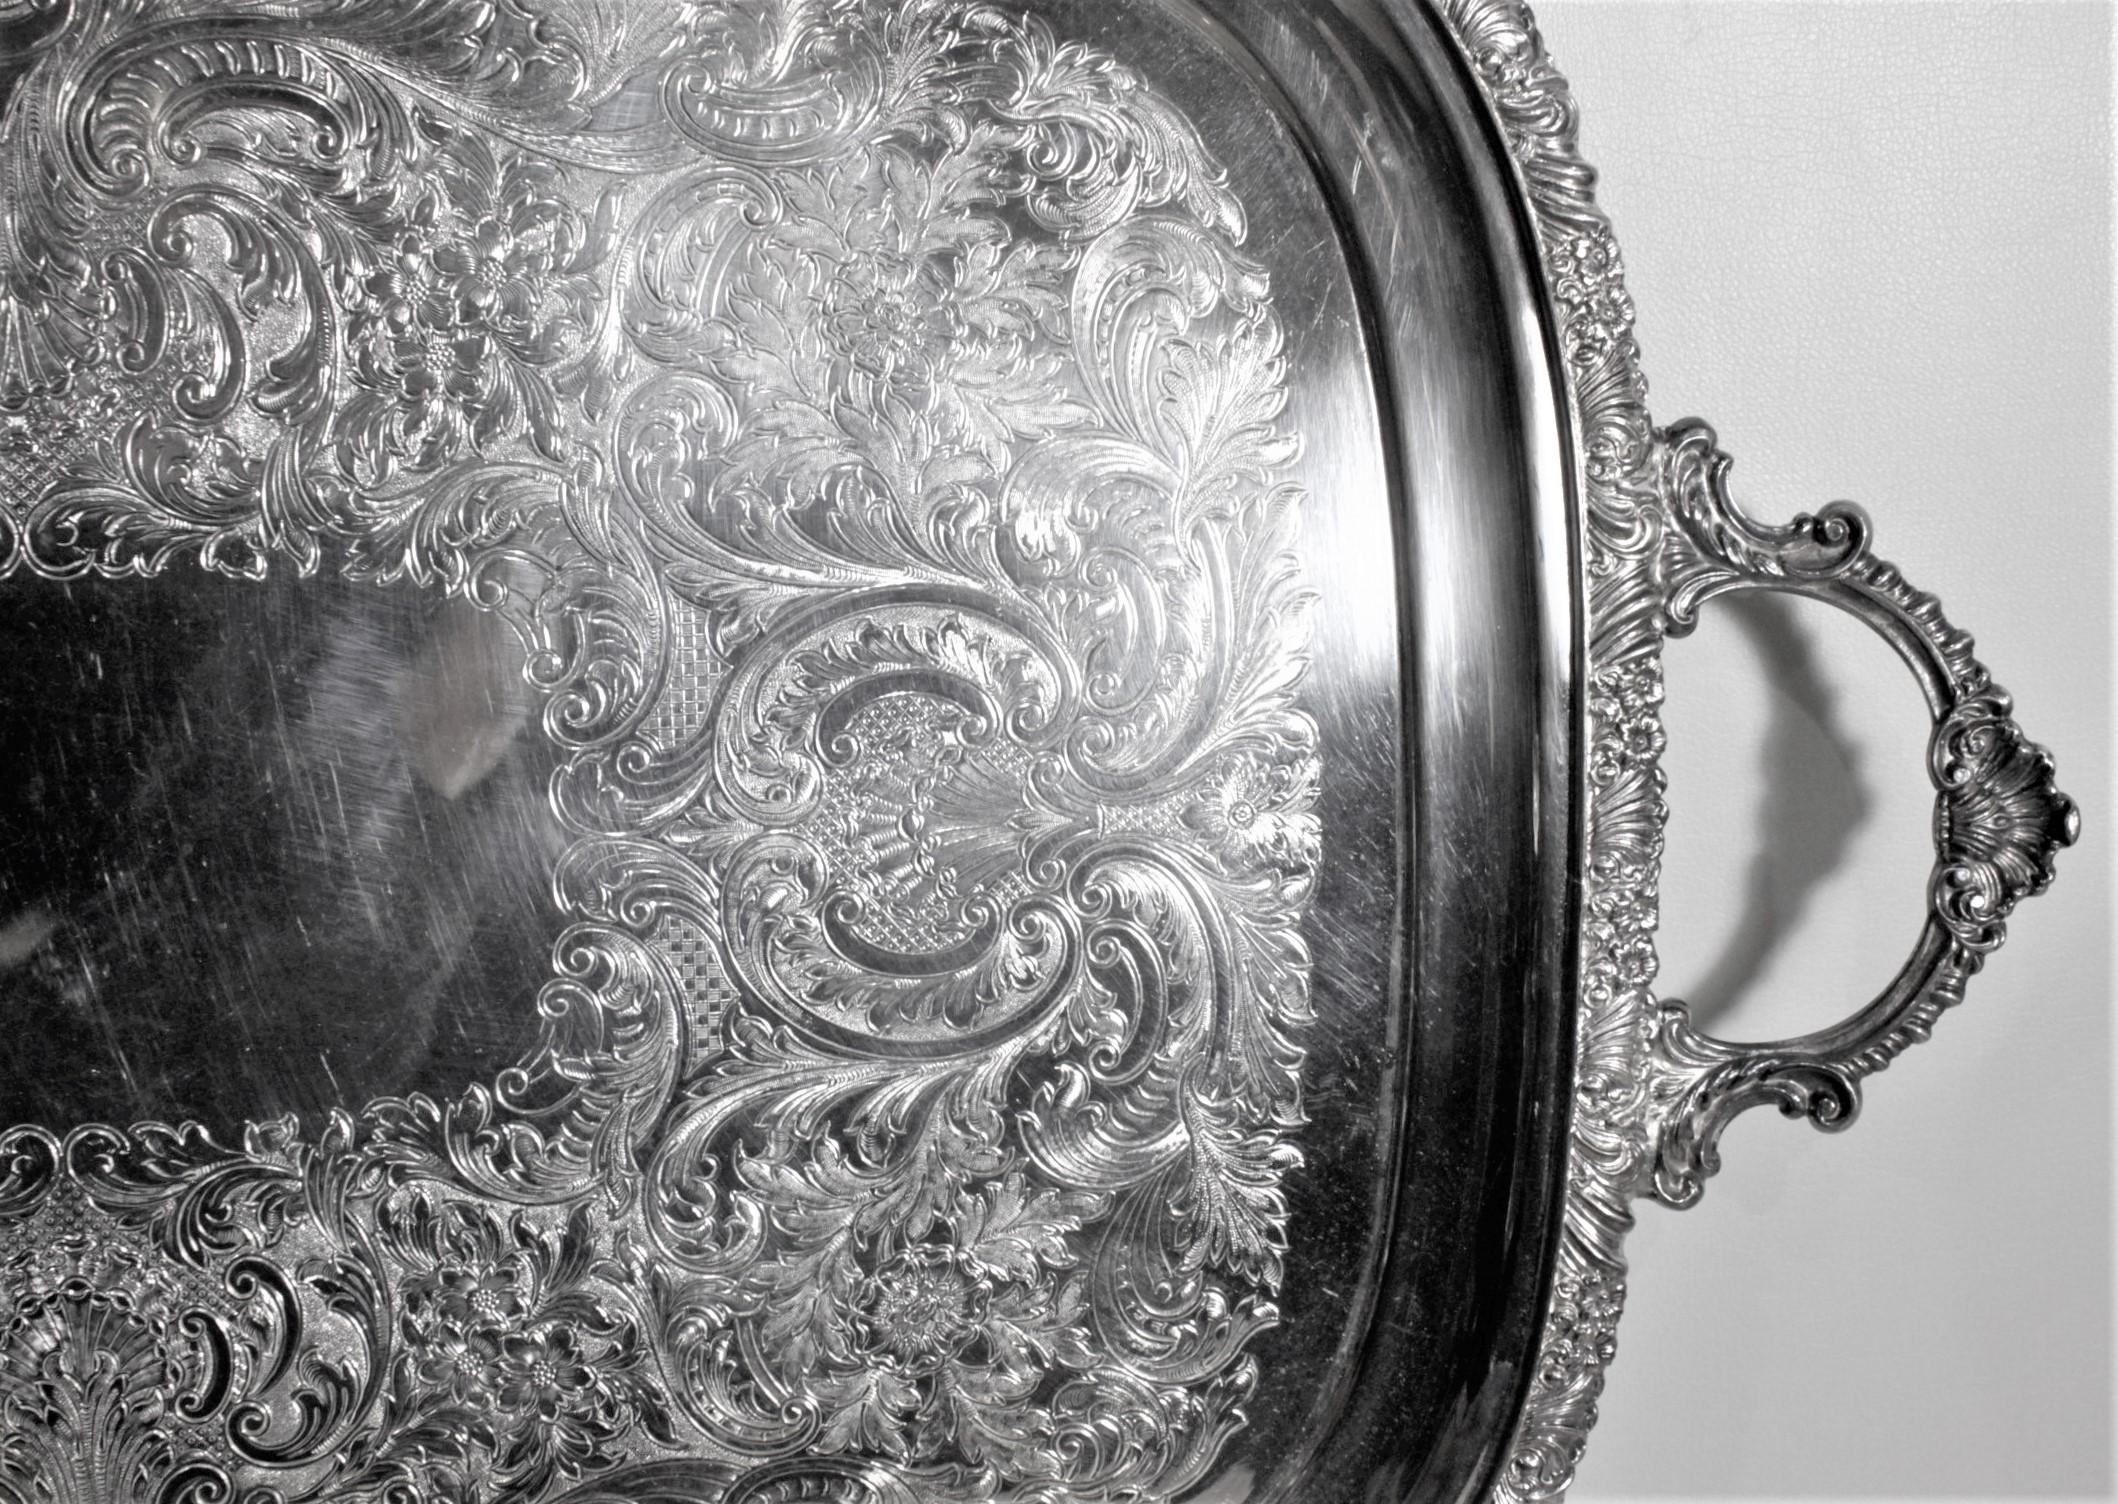 Antique English Silver Plated Serving Tray with Ornate Accents & Engraving 1